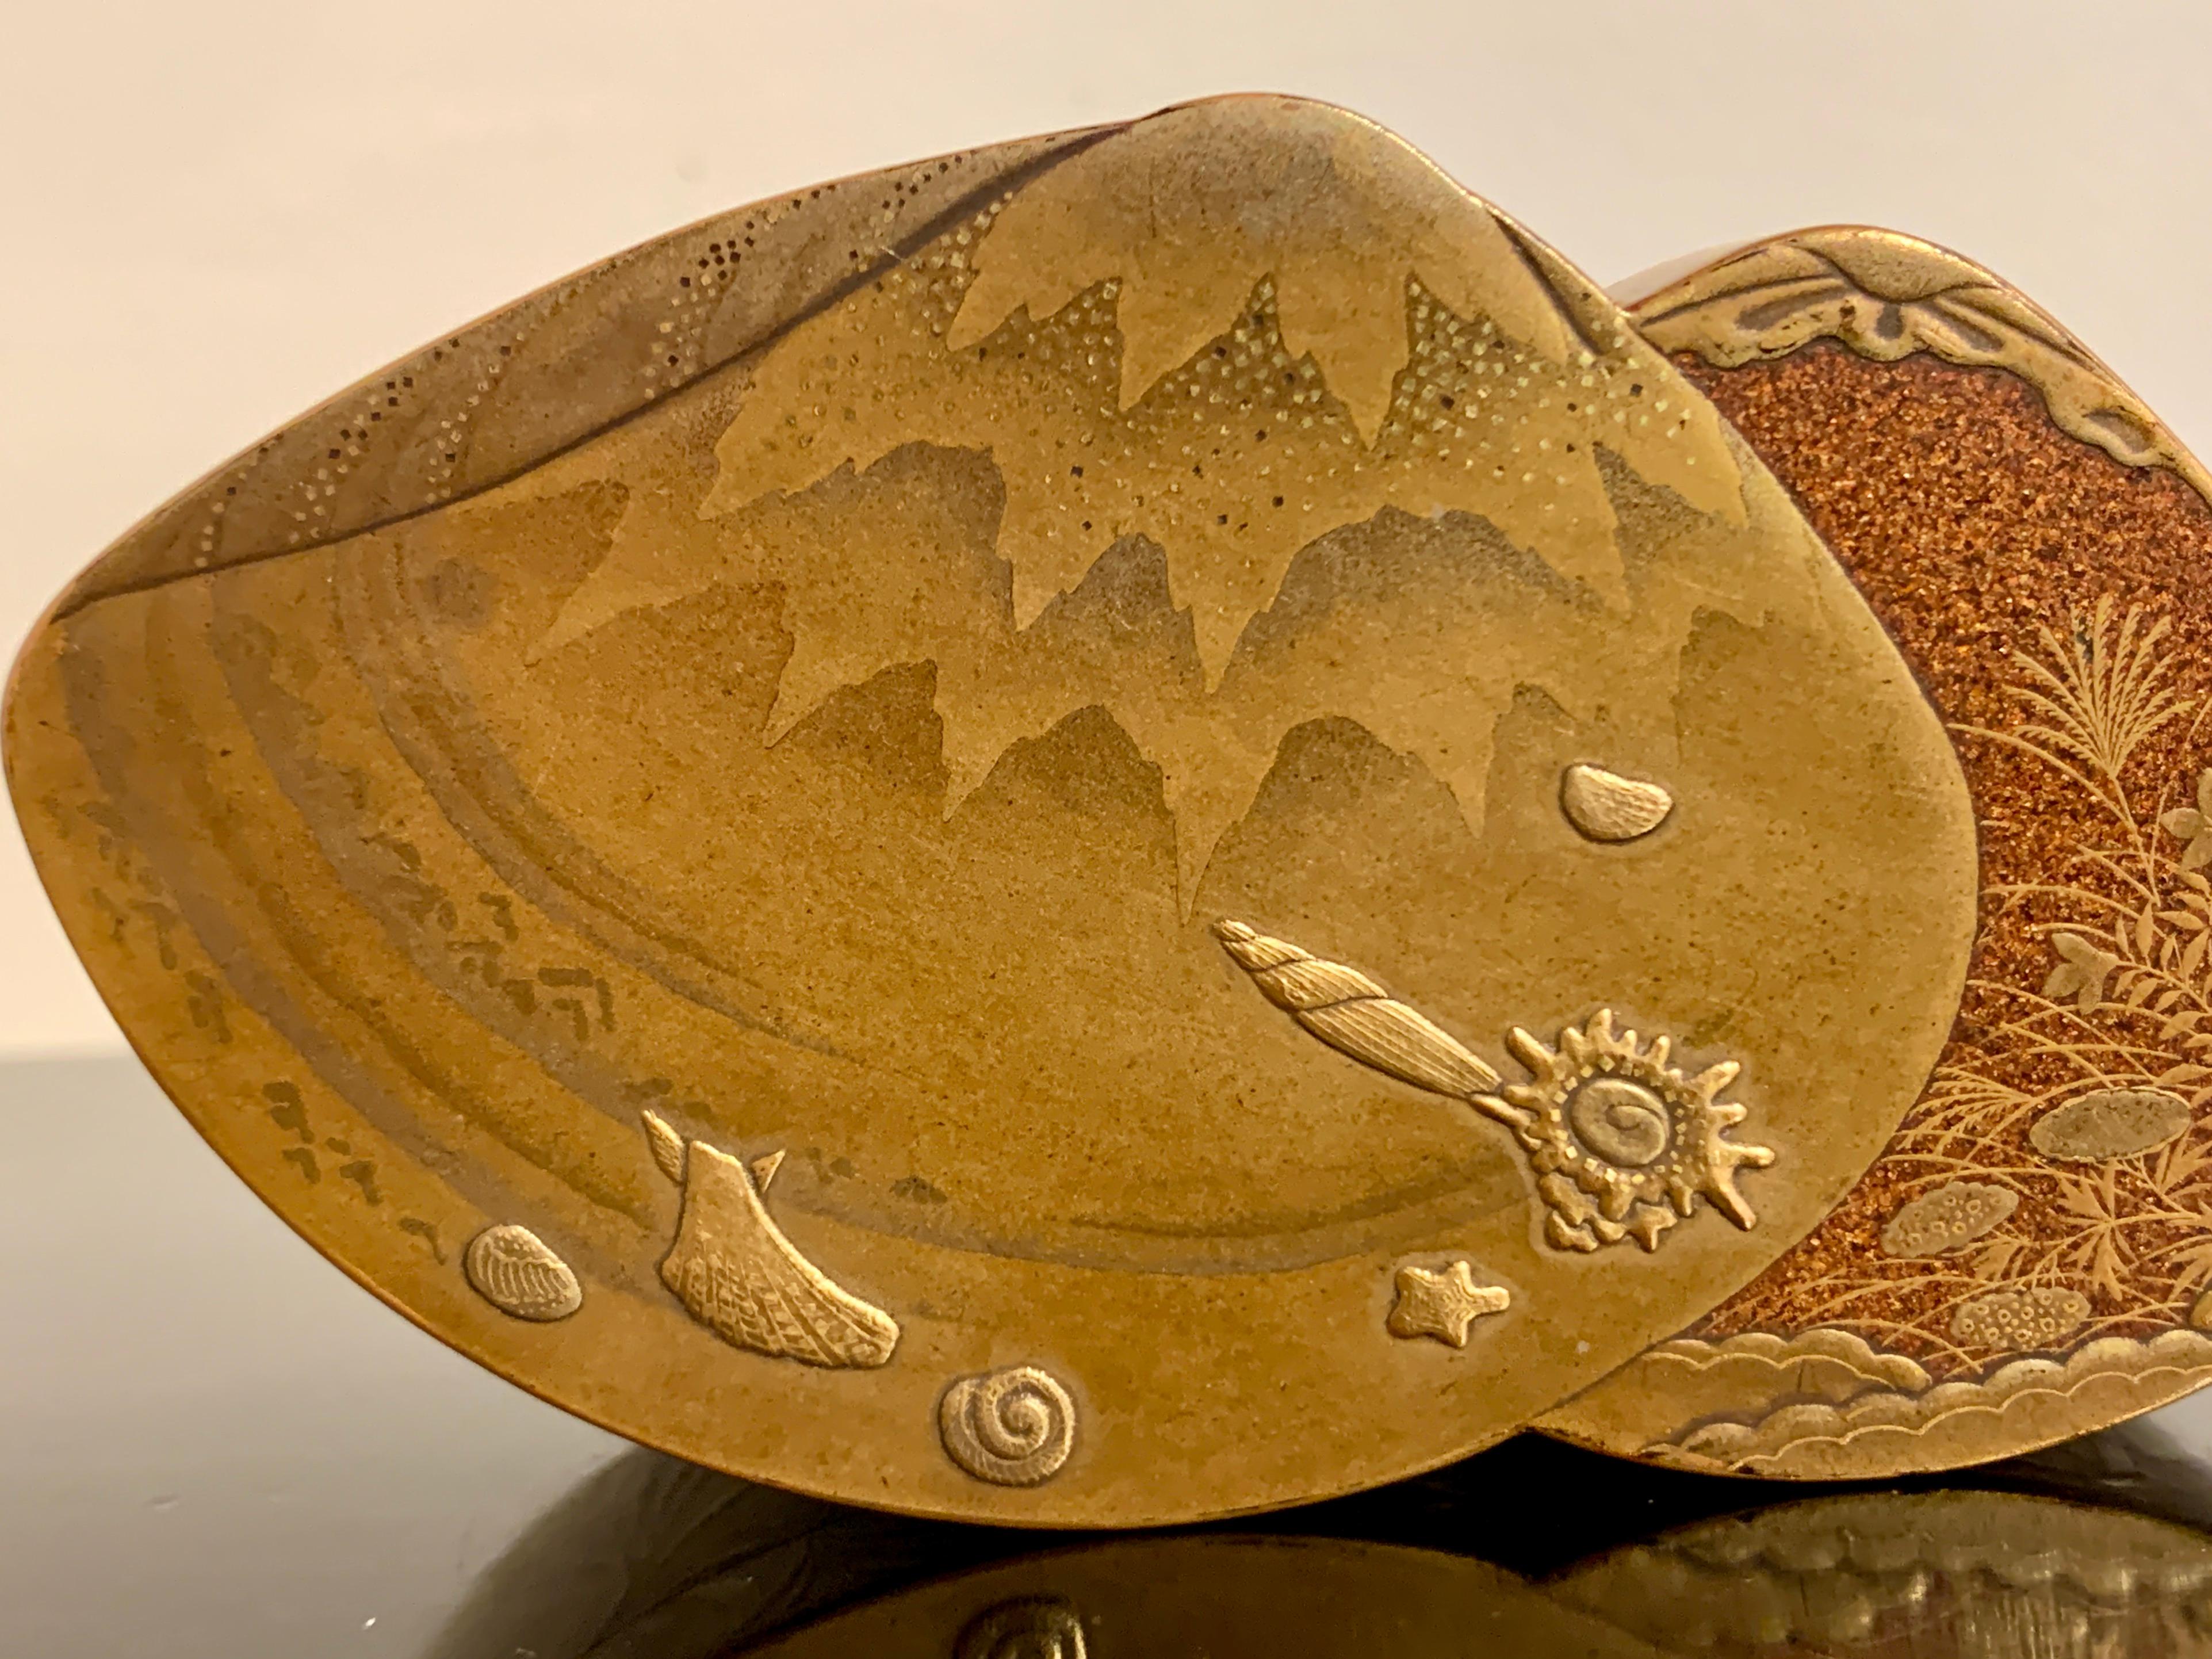 A very fine Japanese lacquer kogo, box for incense, in the shape of two clams, by Zohiko, Meiji period, late 19th or early 20th century, Japan.

The exquisite small Japanese lacquer box, known as a kogo, was originally used to store precious